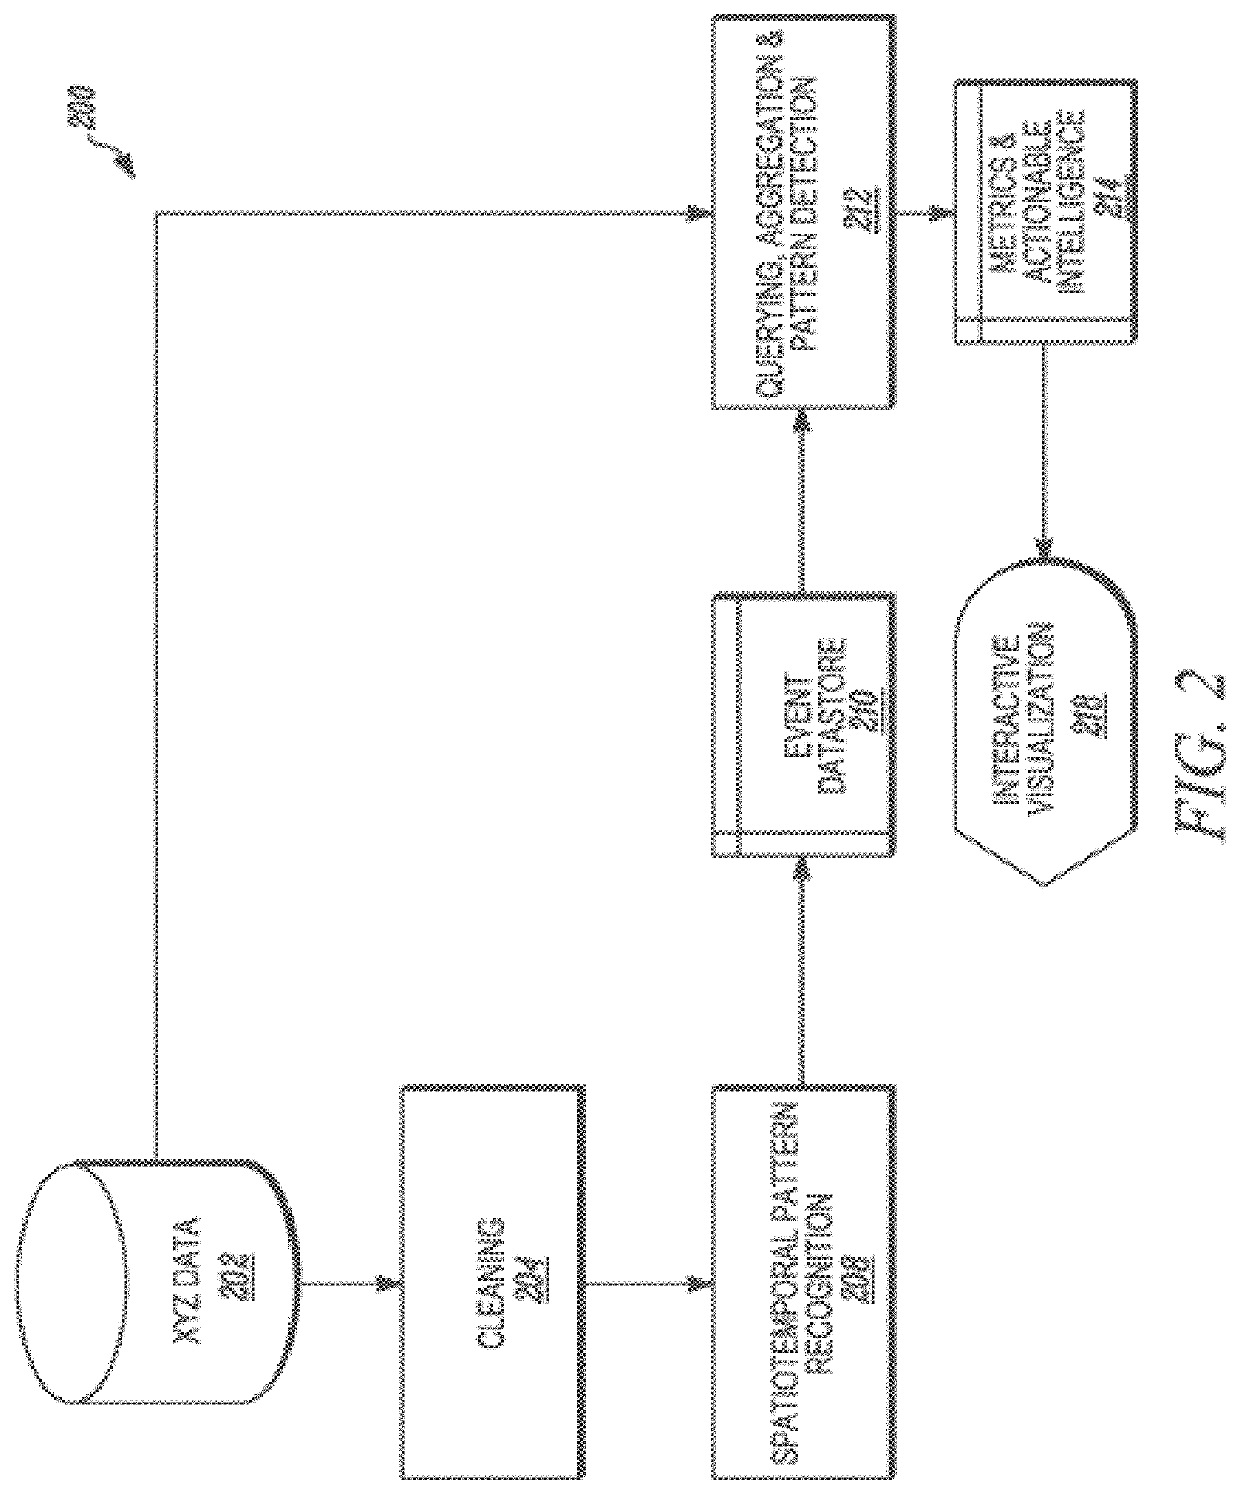 Methods, systems, and user interface navigation of video content based spatiotemporal pattern recognition